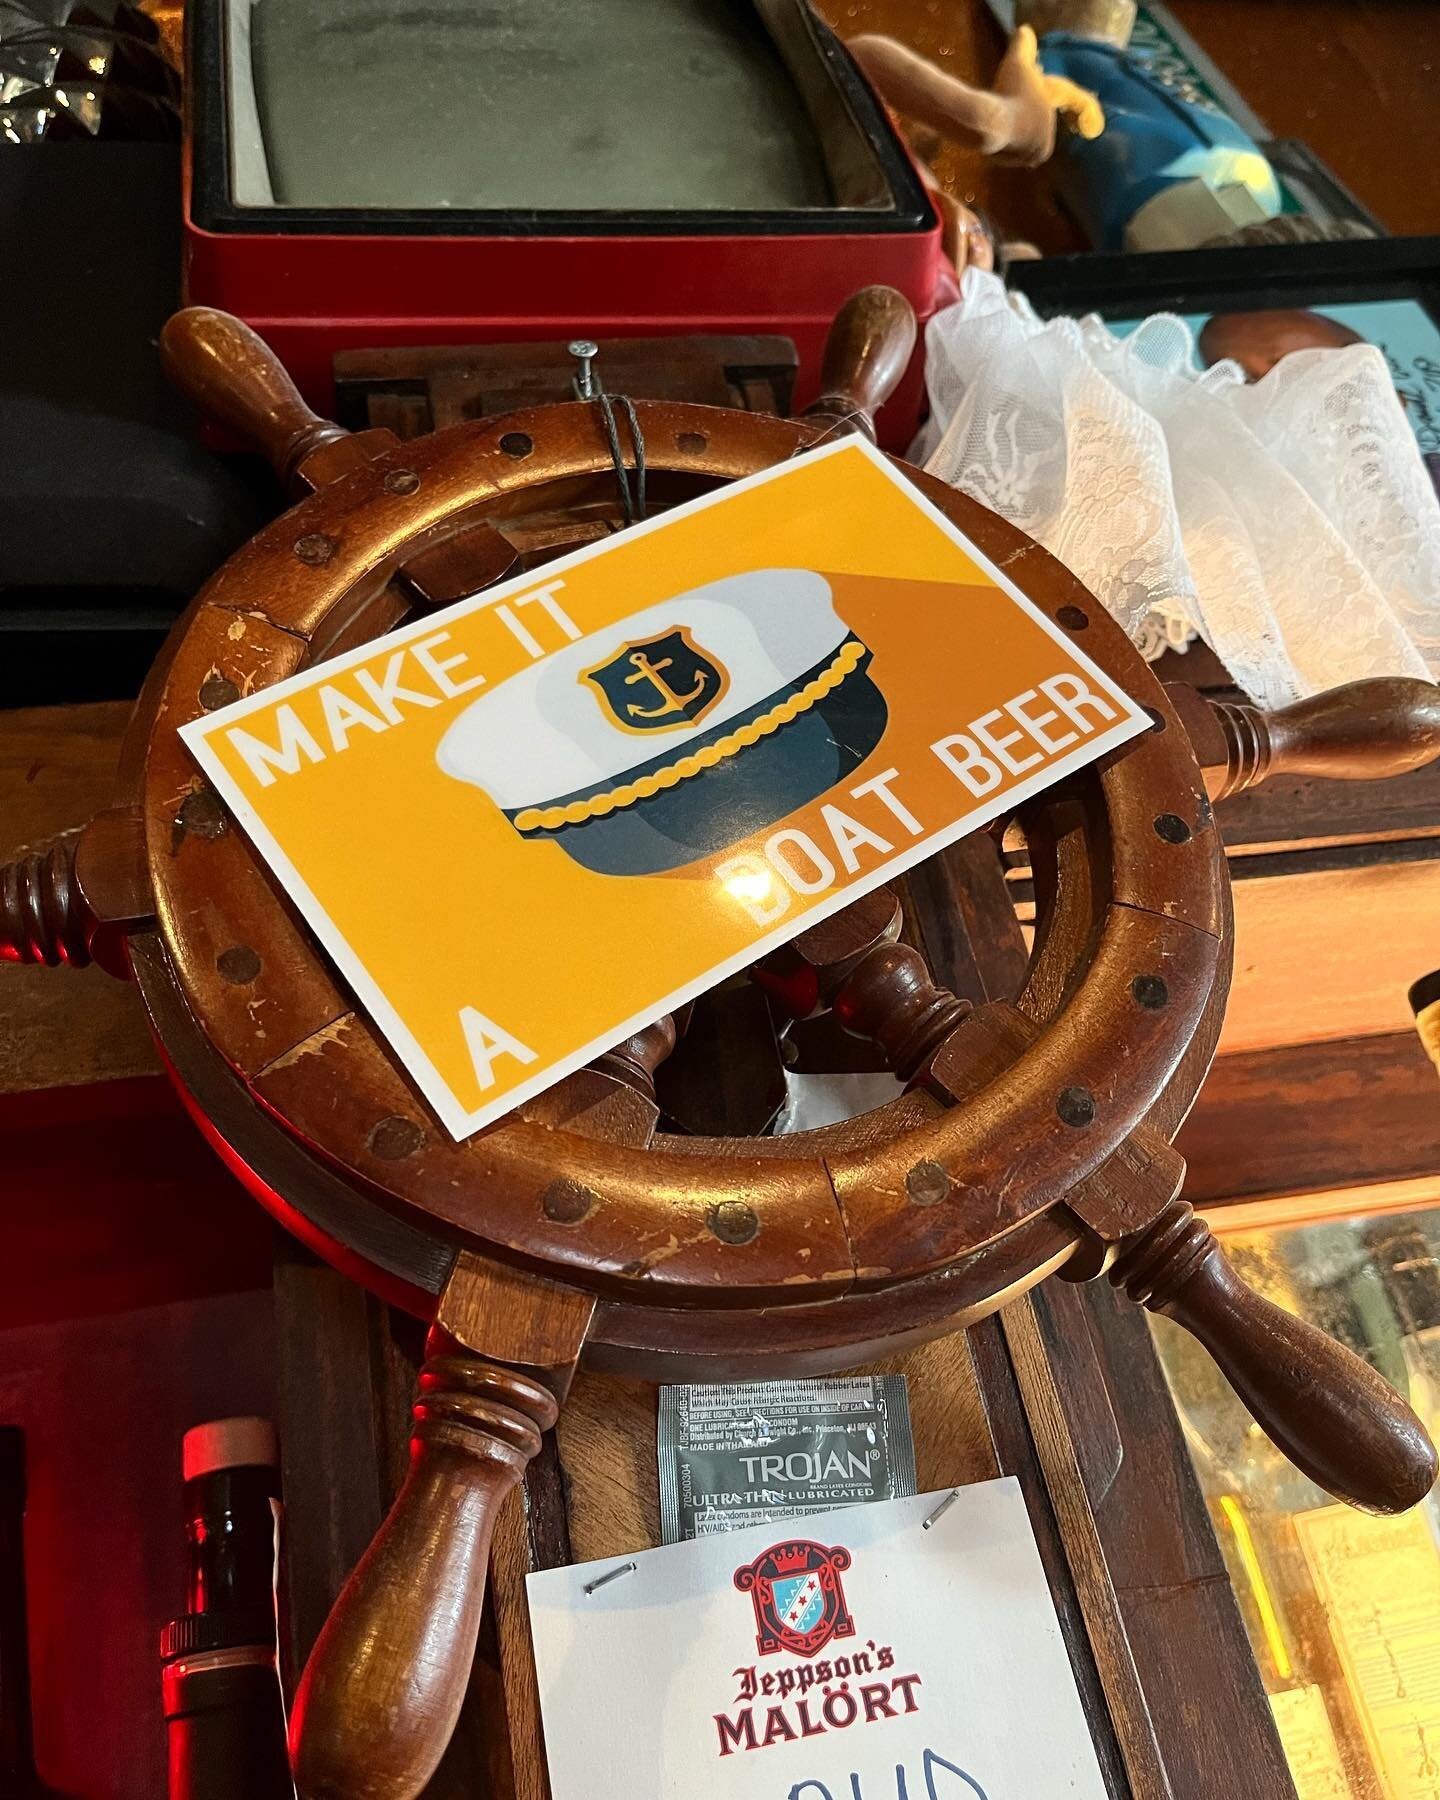 Just say &lsquo;Make it a Boat Beer&rsquo;. We&rsquo;ll know what you mean. 
Open for shenanigans today at 4. 
@counterservice_ pop-up at 6.
Silver Medal Karaoke at 9.